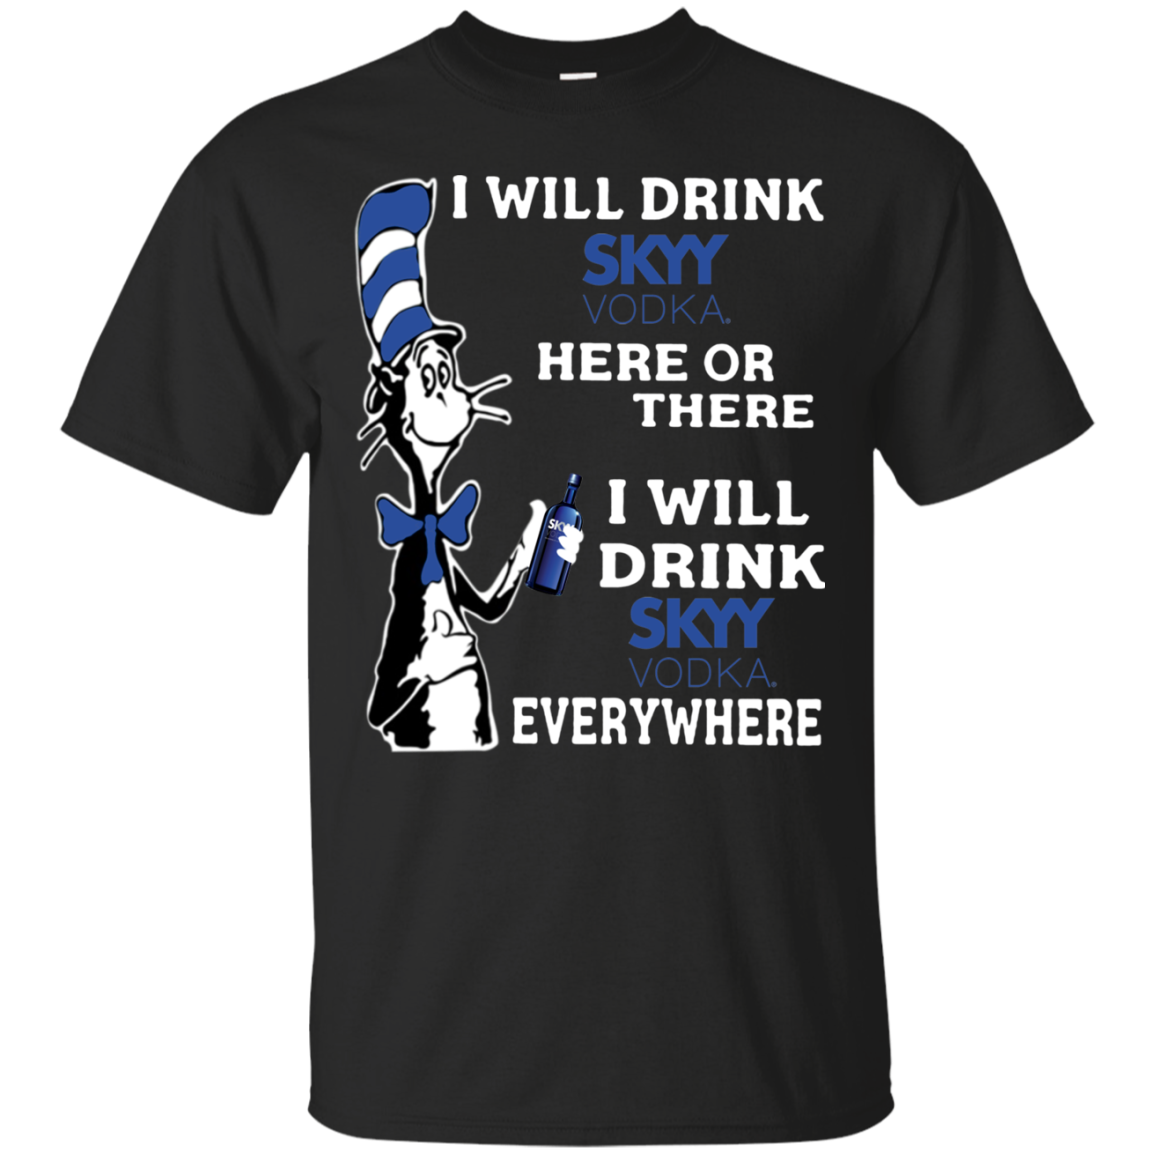 Check Out This Awesome I Will Drink Skyy Vodka Here Or There I Will Drink Skyy Vodka Every Shirts